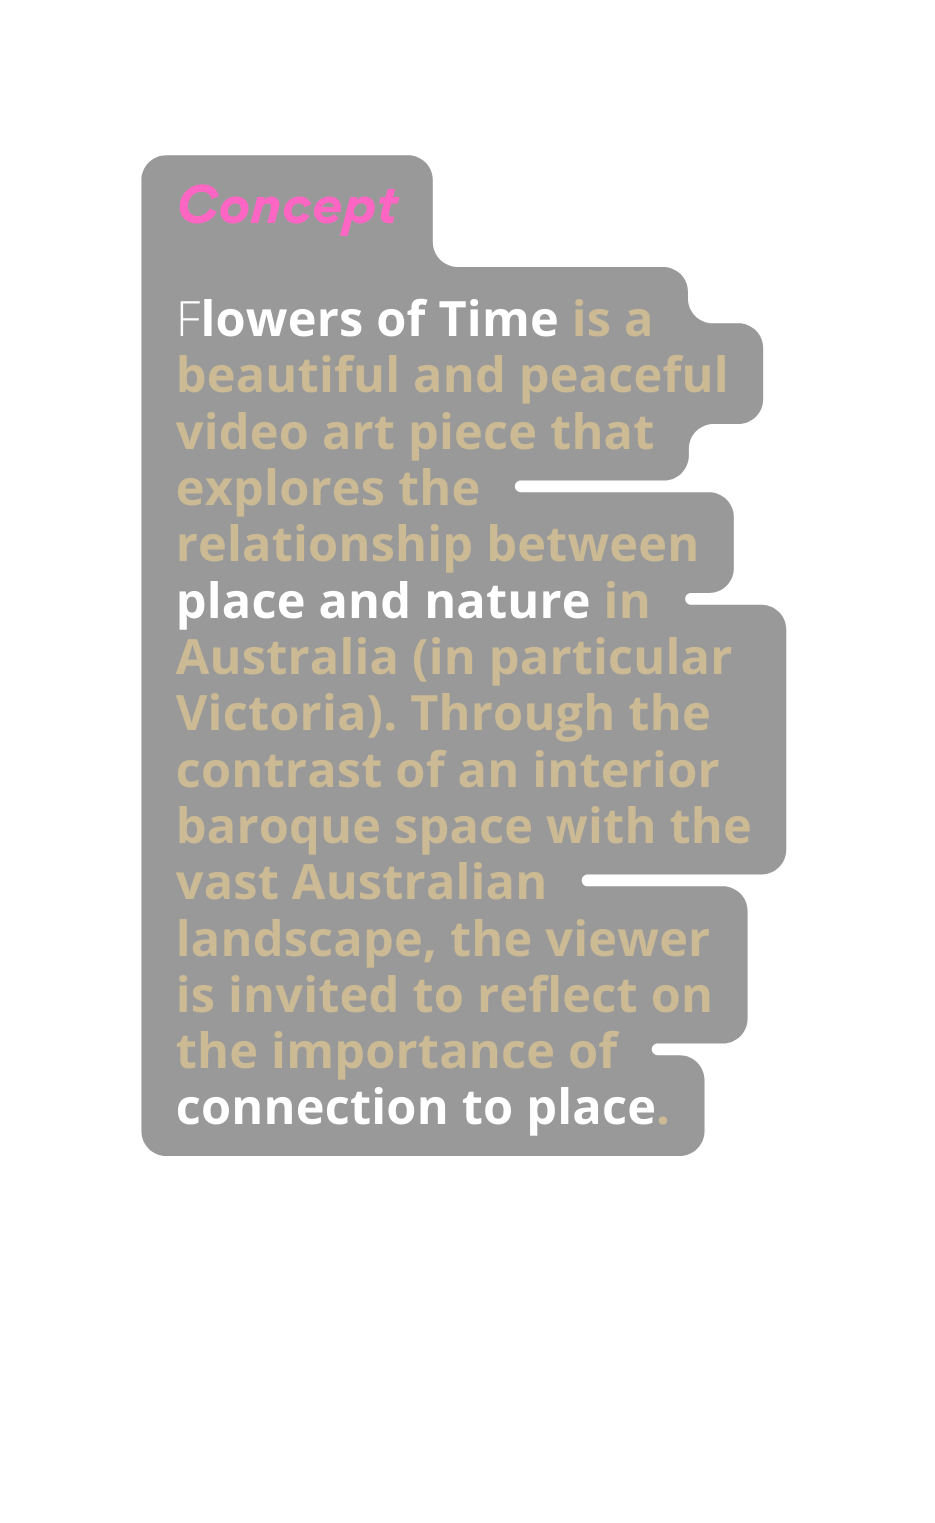 Concept Flowers of Time is a beautiful and peaceful video art piece that explores the relationship between place and nature in Australia in particular Victoria Through the contrast of an interior baroque space with the vast Australian landscape the viewer is invited to reflect on the importance of connection to place